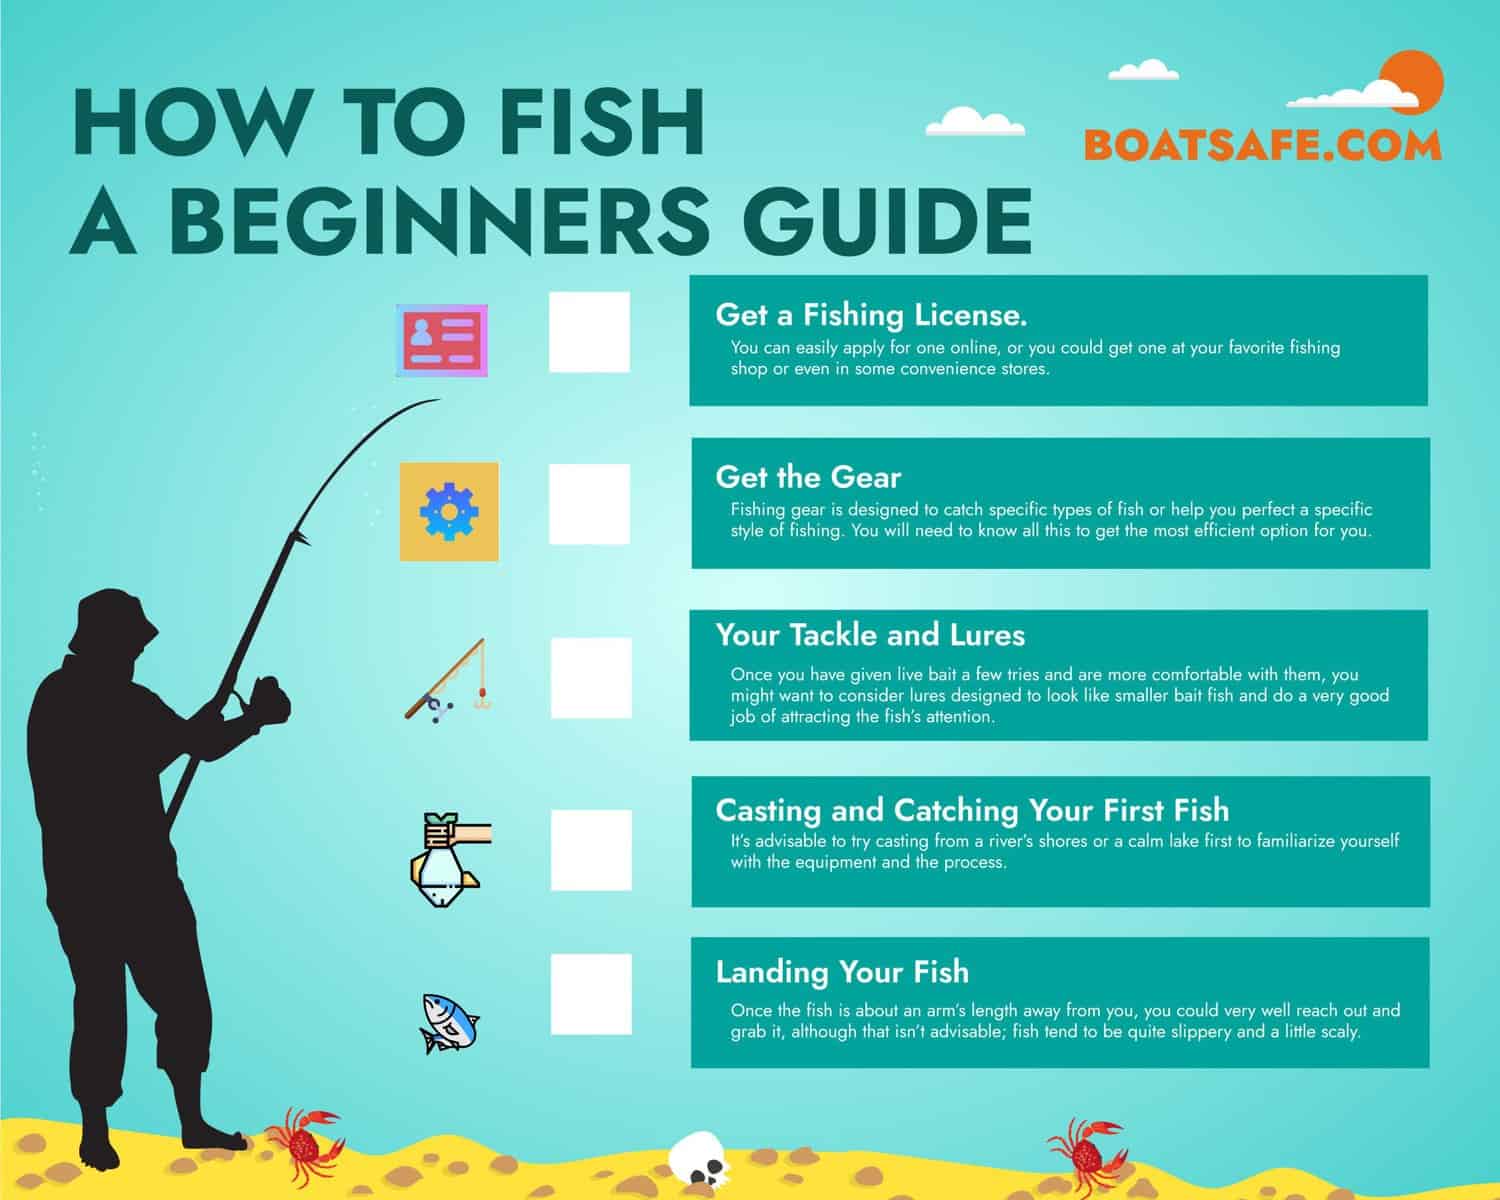 FISHING GUIDE FOR BEGINNERS: Beginner guide book on how to fish